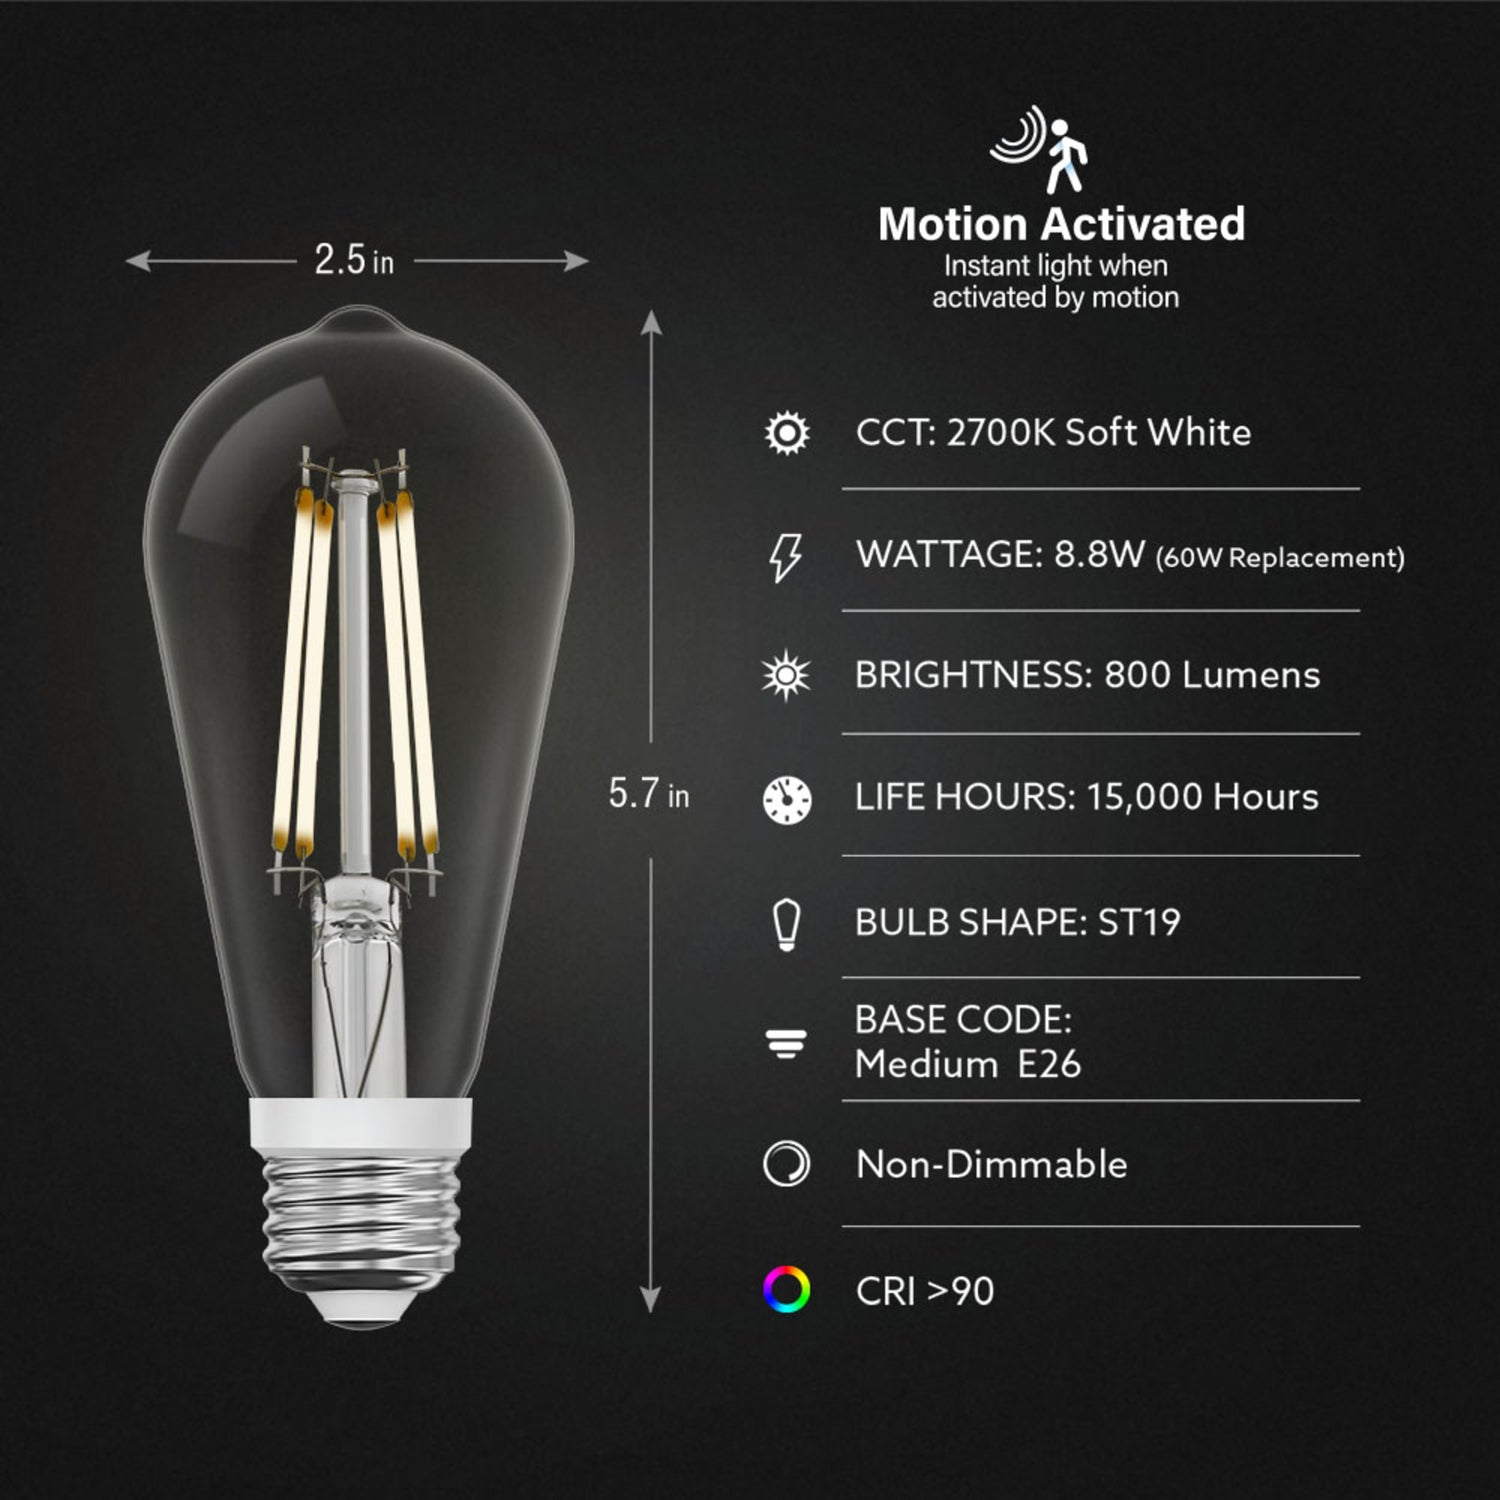 8.8W (60W Replacement) ST19 E26 Motion Activated Straight Filament Clear Glass Vintage Edison LED Light Bulb, Soft White